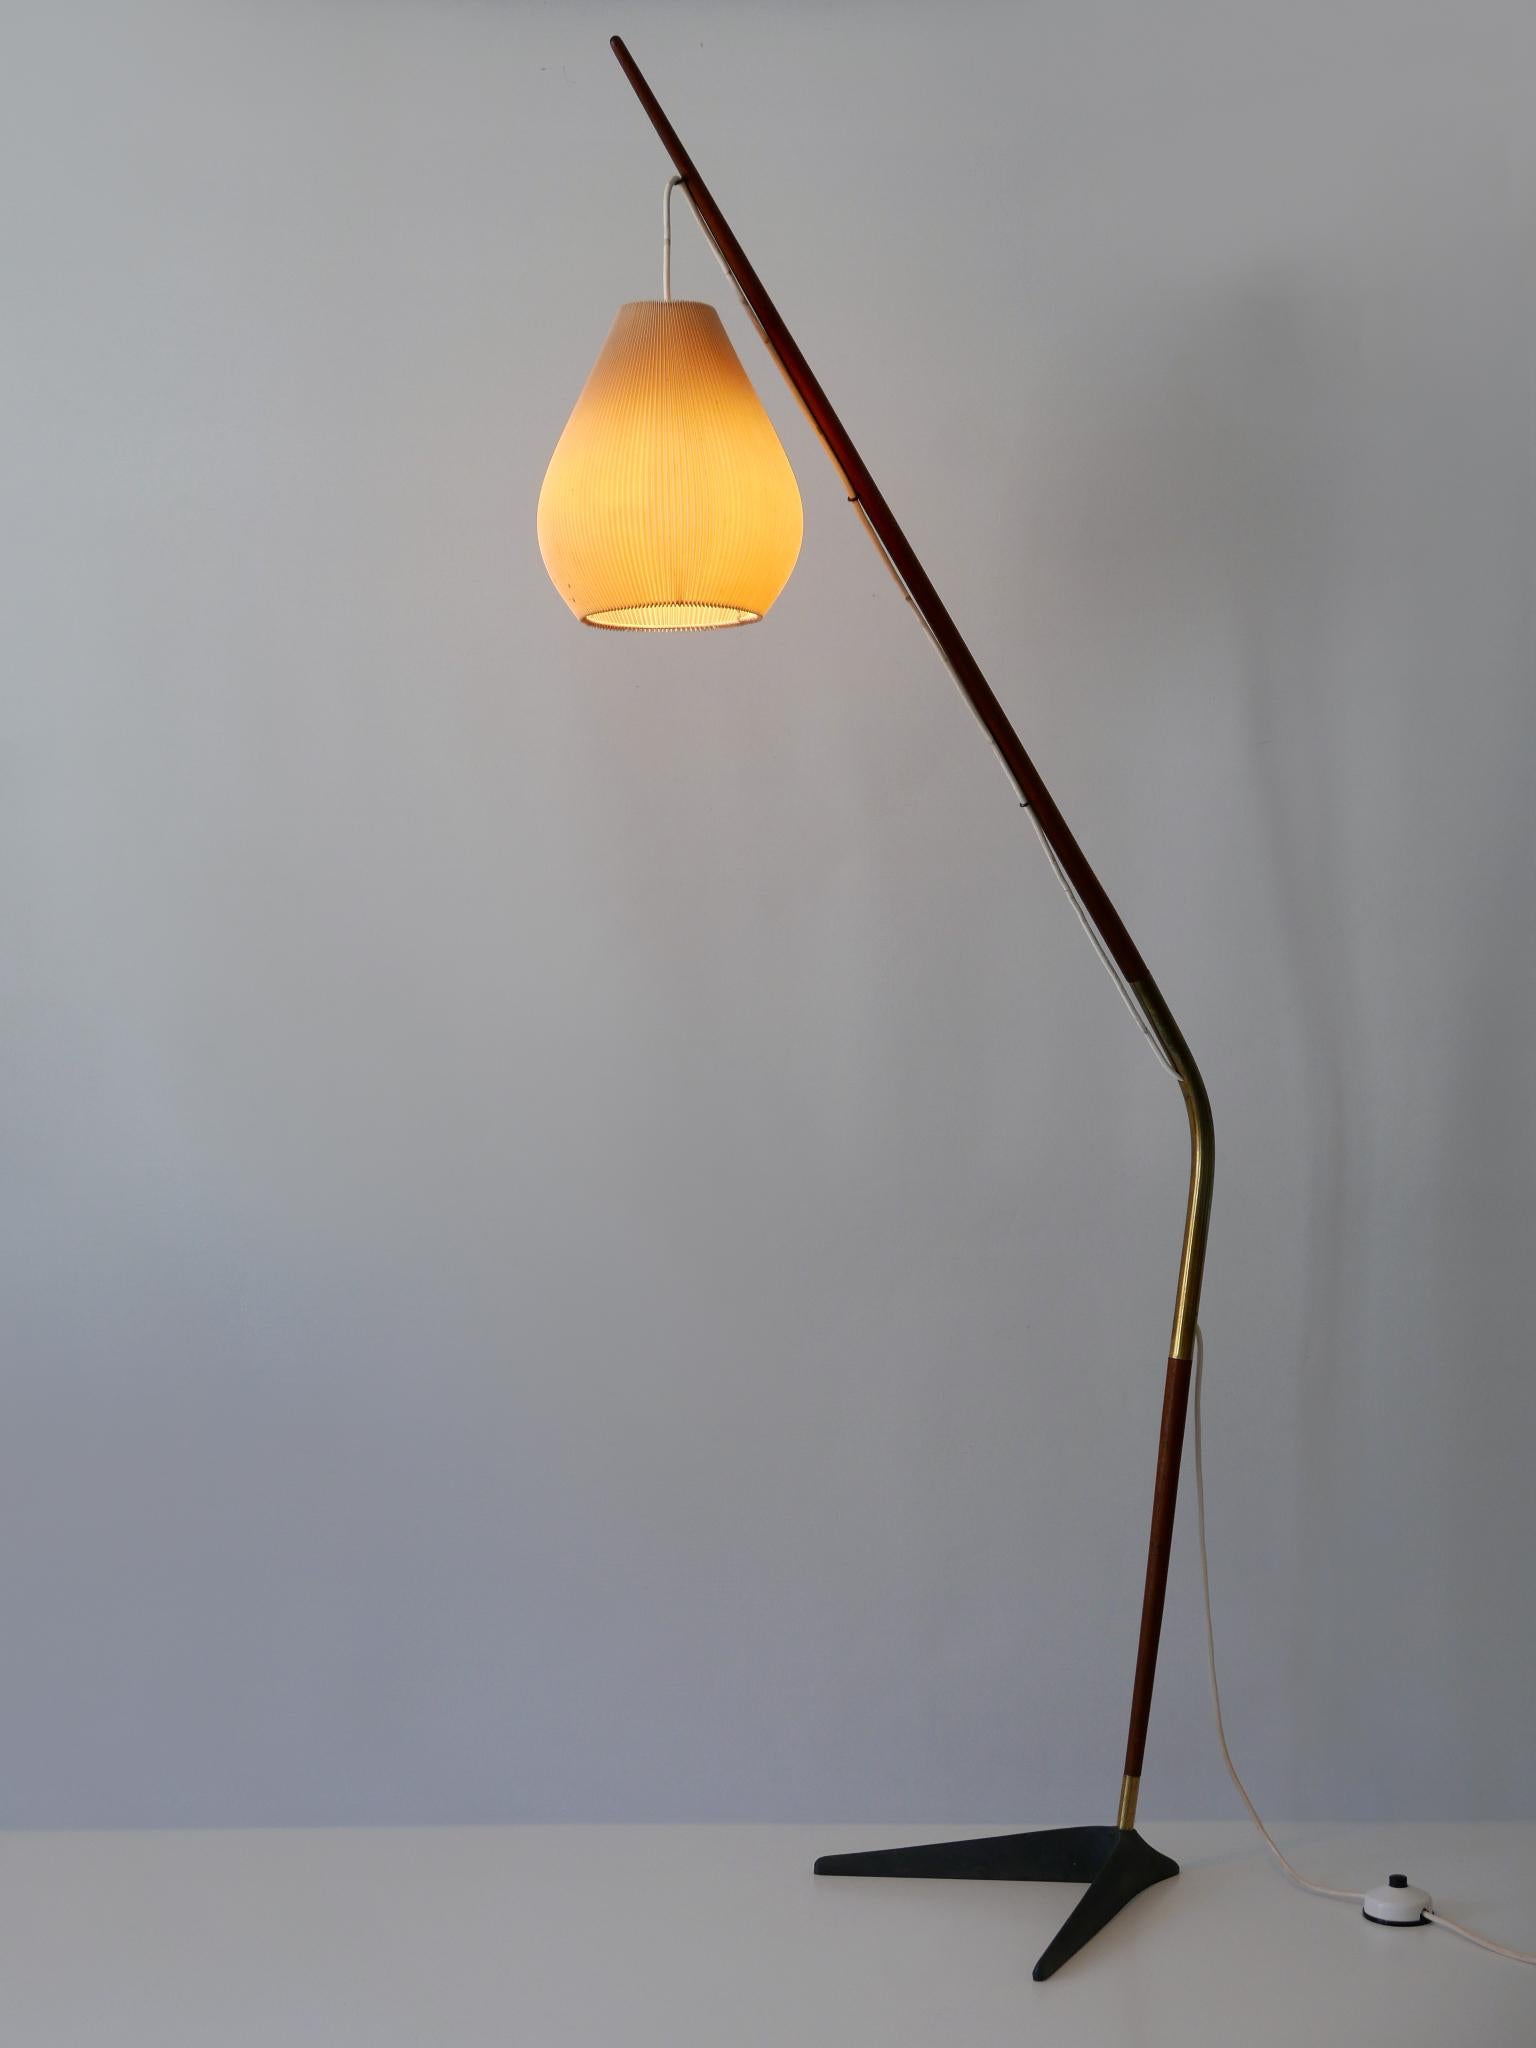 Danish Exceptional 'Fishing Pole' Floor Lamp by Svend Aage Holm Sørensen Denmark 1950s For Sale